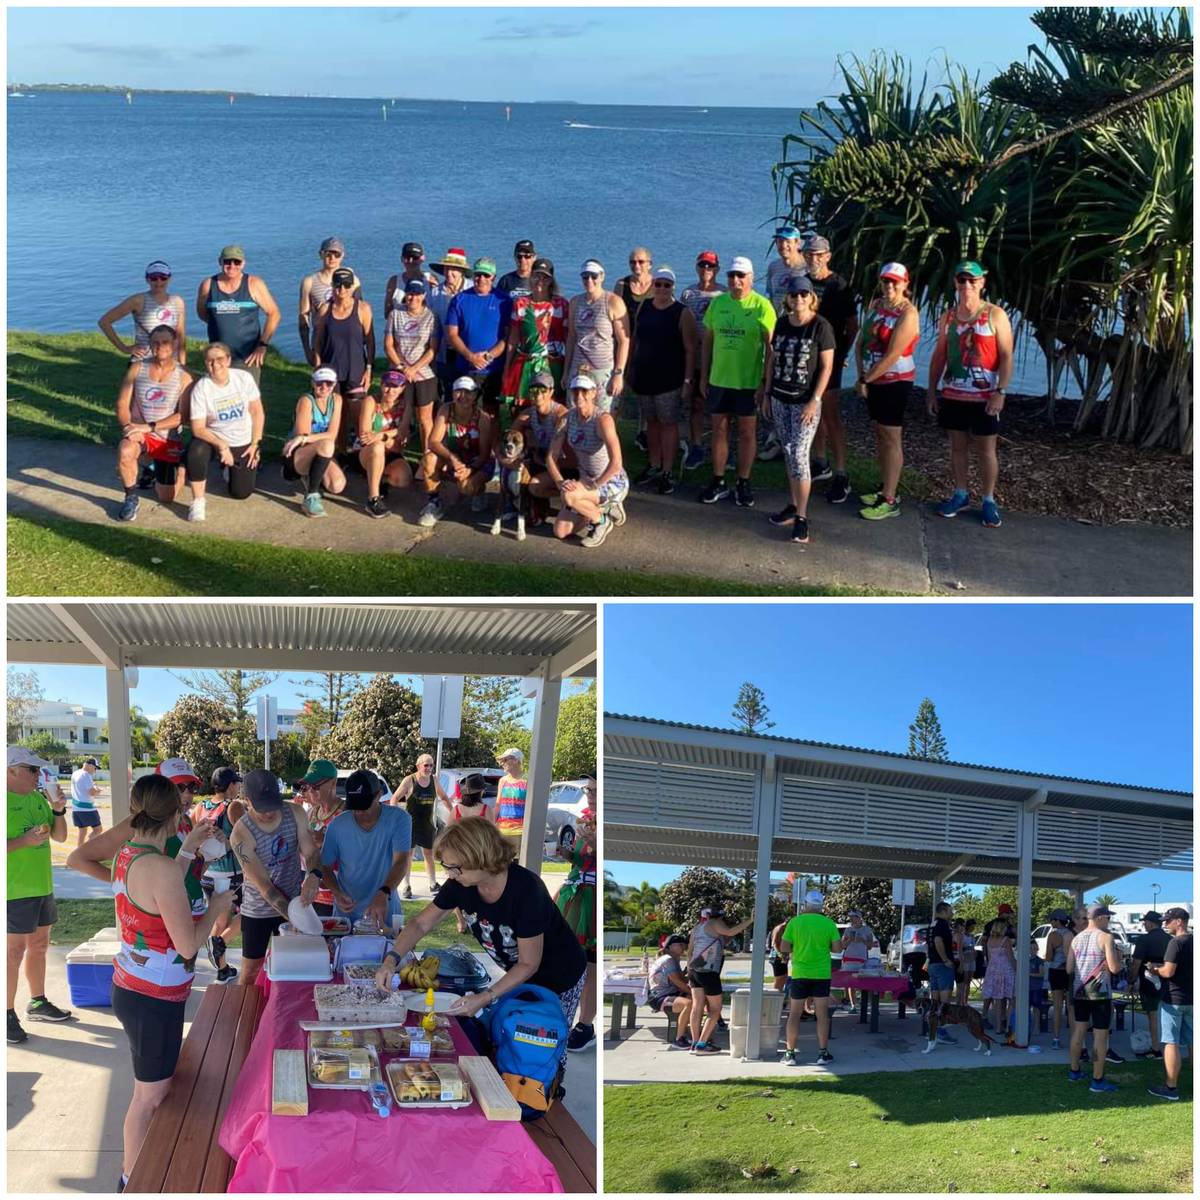 Last Sunday we ventured down to the Cleveland’s waterfront for a run and a Christmas party with one of our local run groups. After the run, we had a cruise around town and collected some pretty photos to show you the area! (Photos above by Pace Mates run club)